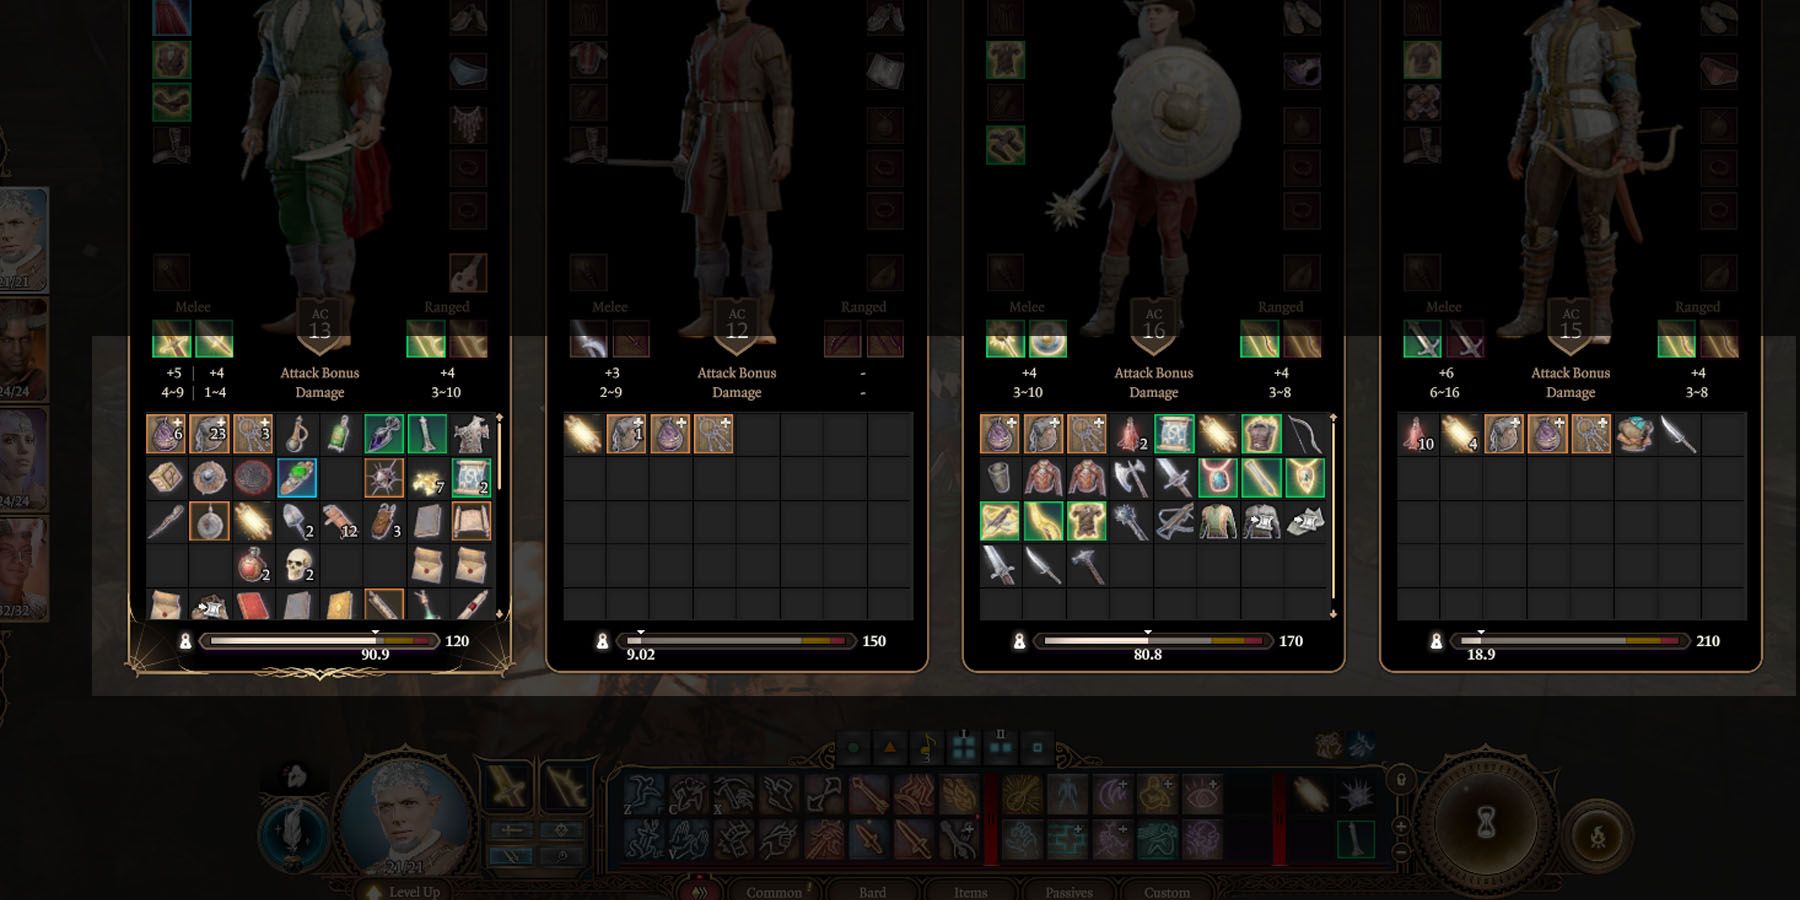 The Inventory of all party members in Baldurs Gate 3